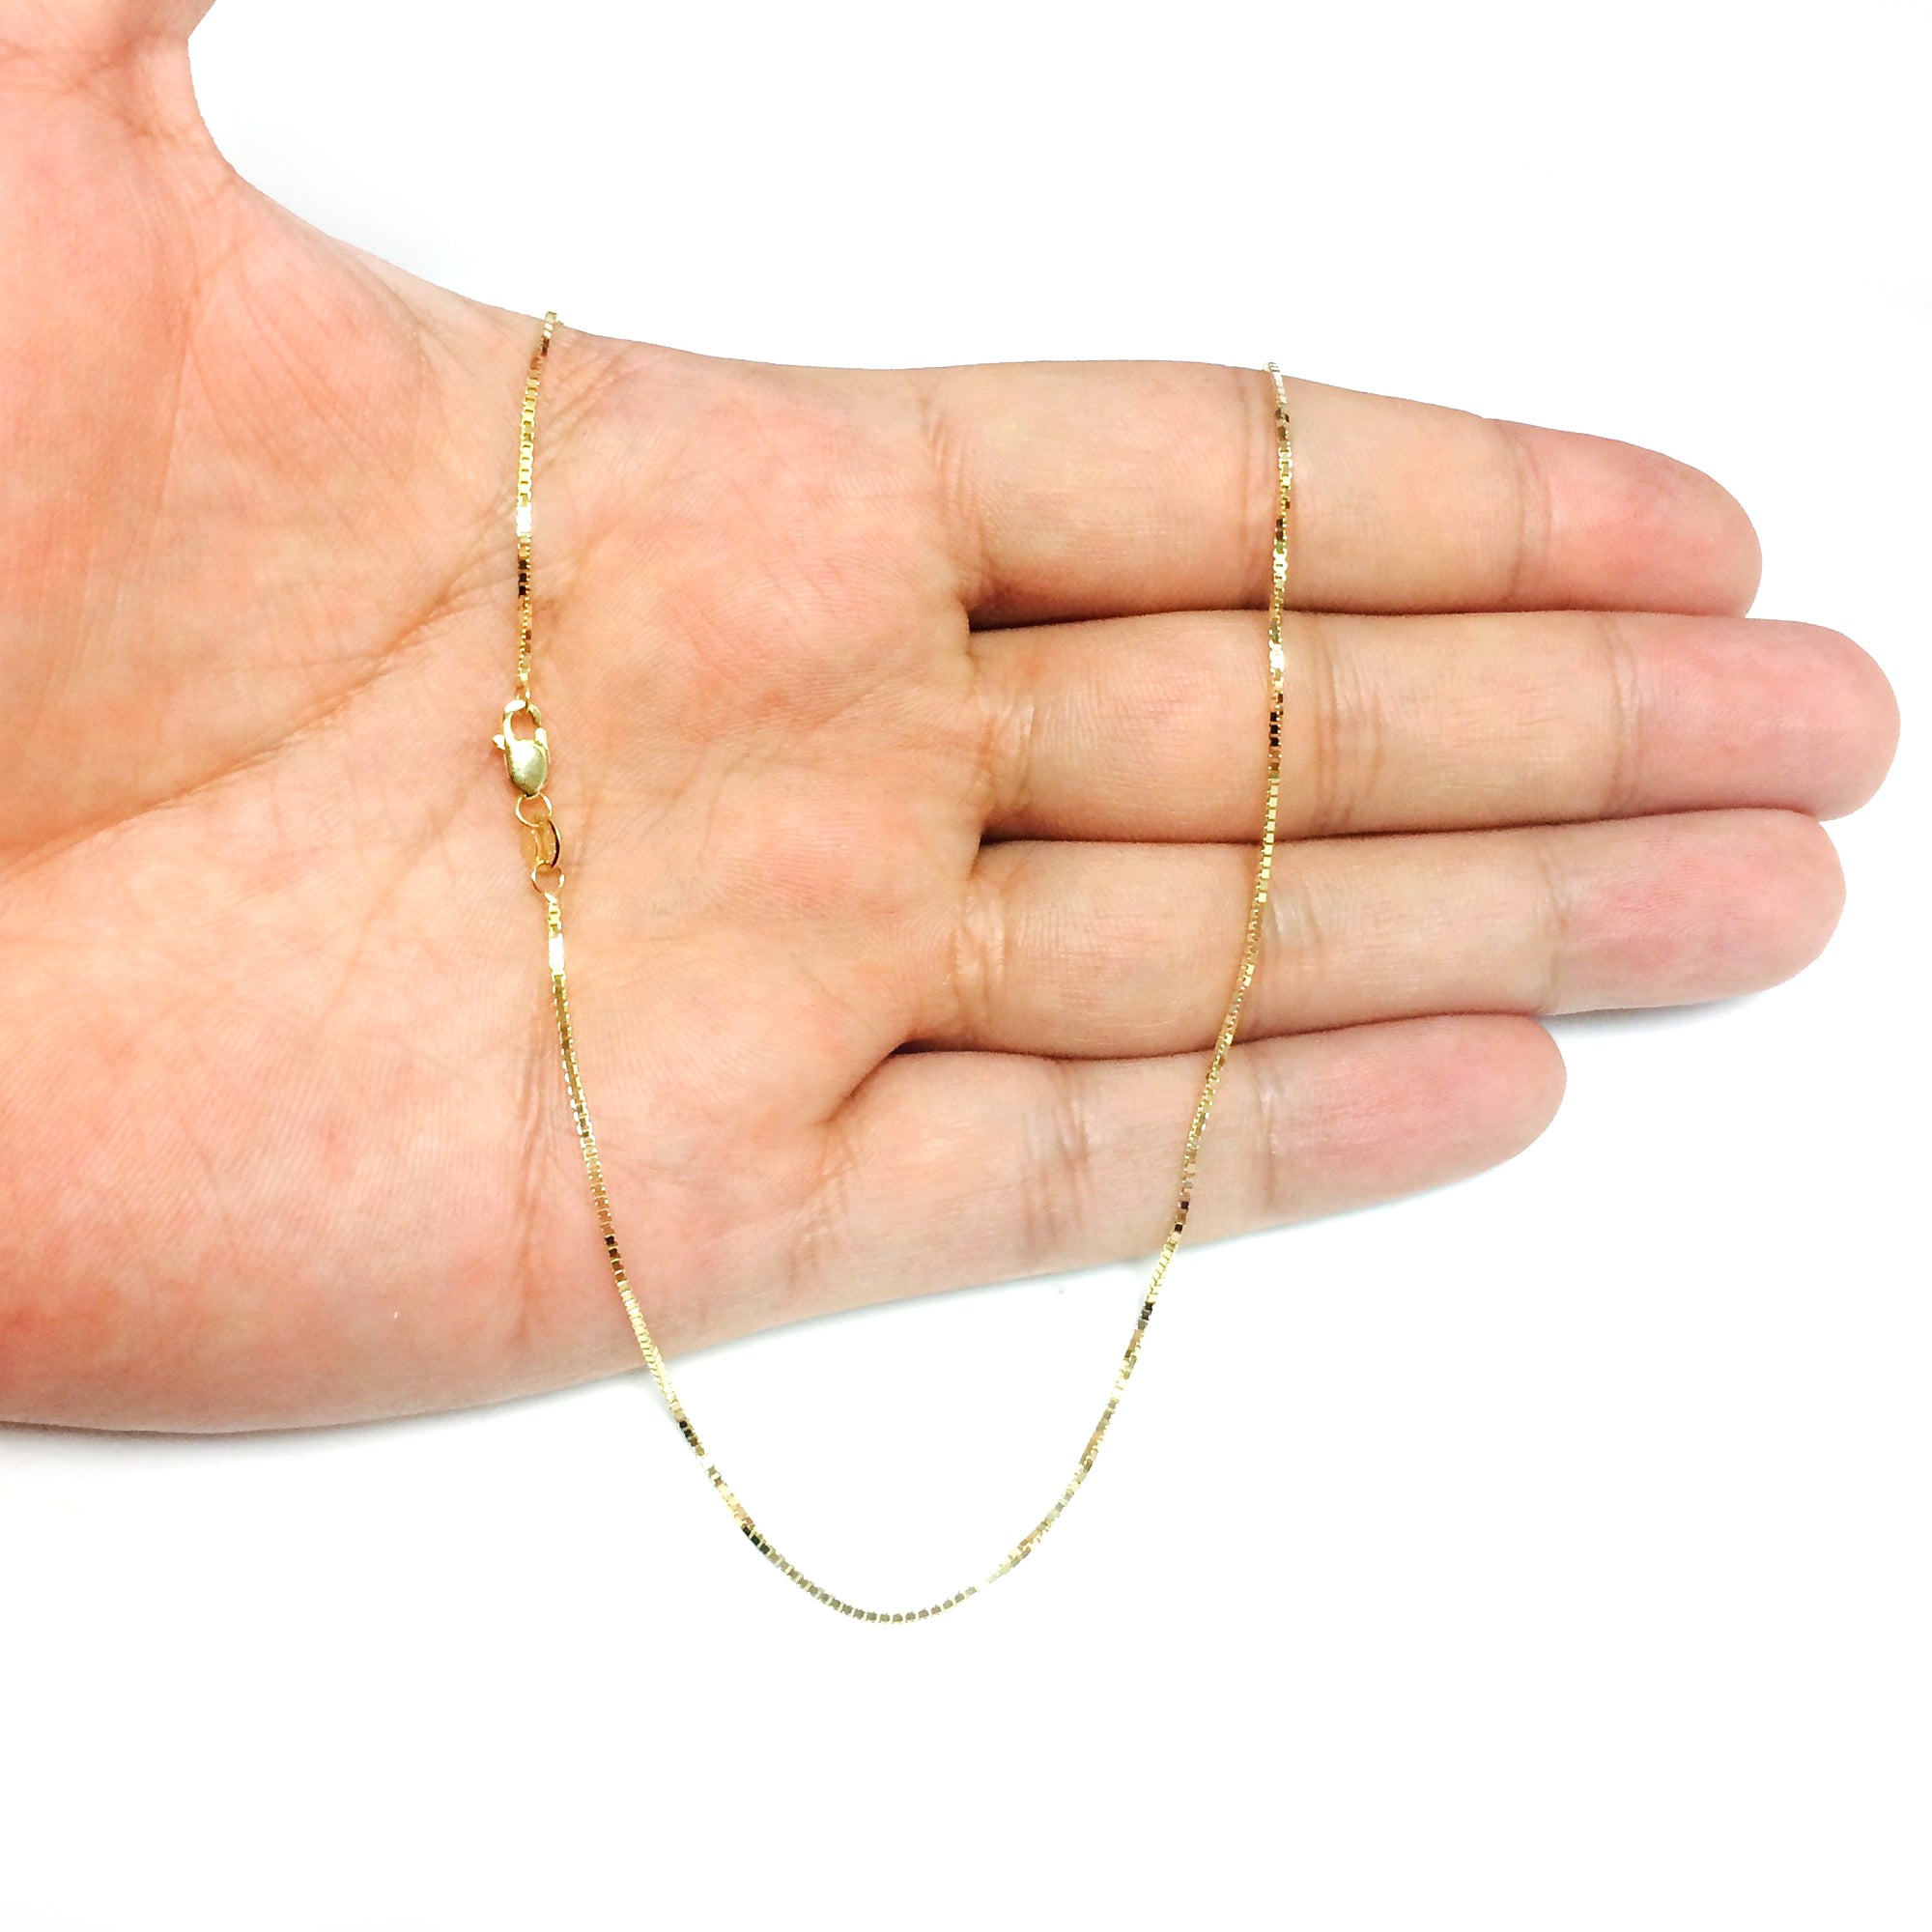 14k Yellow Solid Gold Mirror Box Chain Necklace, 1mm fine designer jewelry for men and women